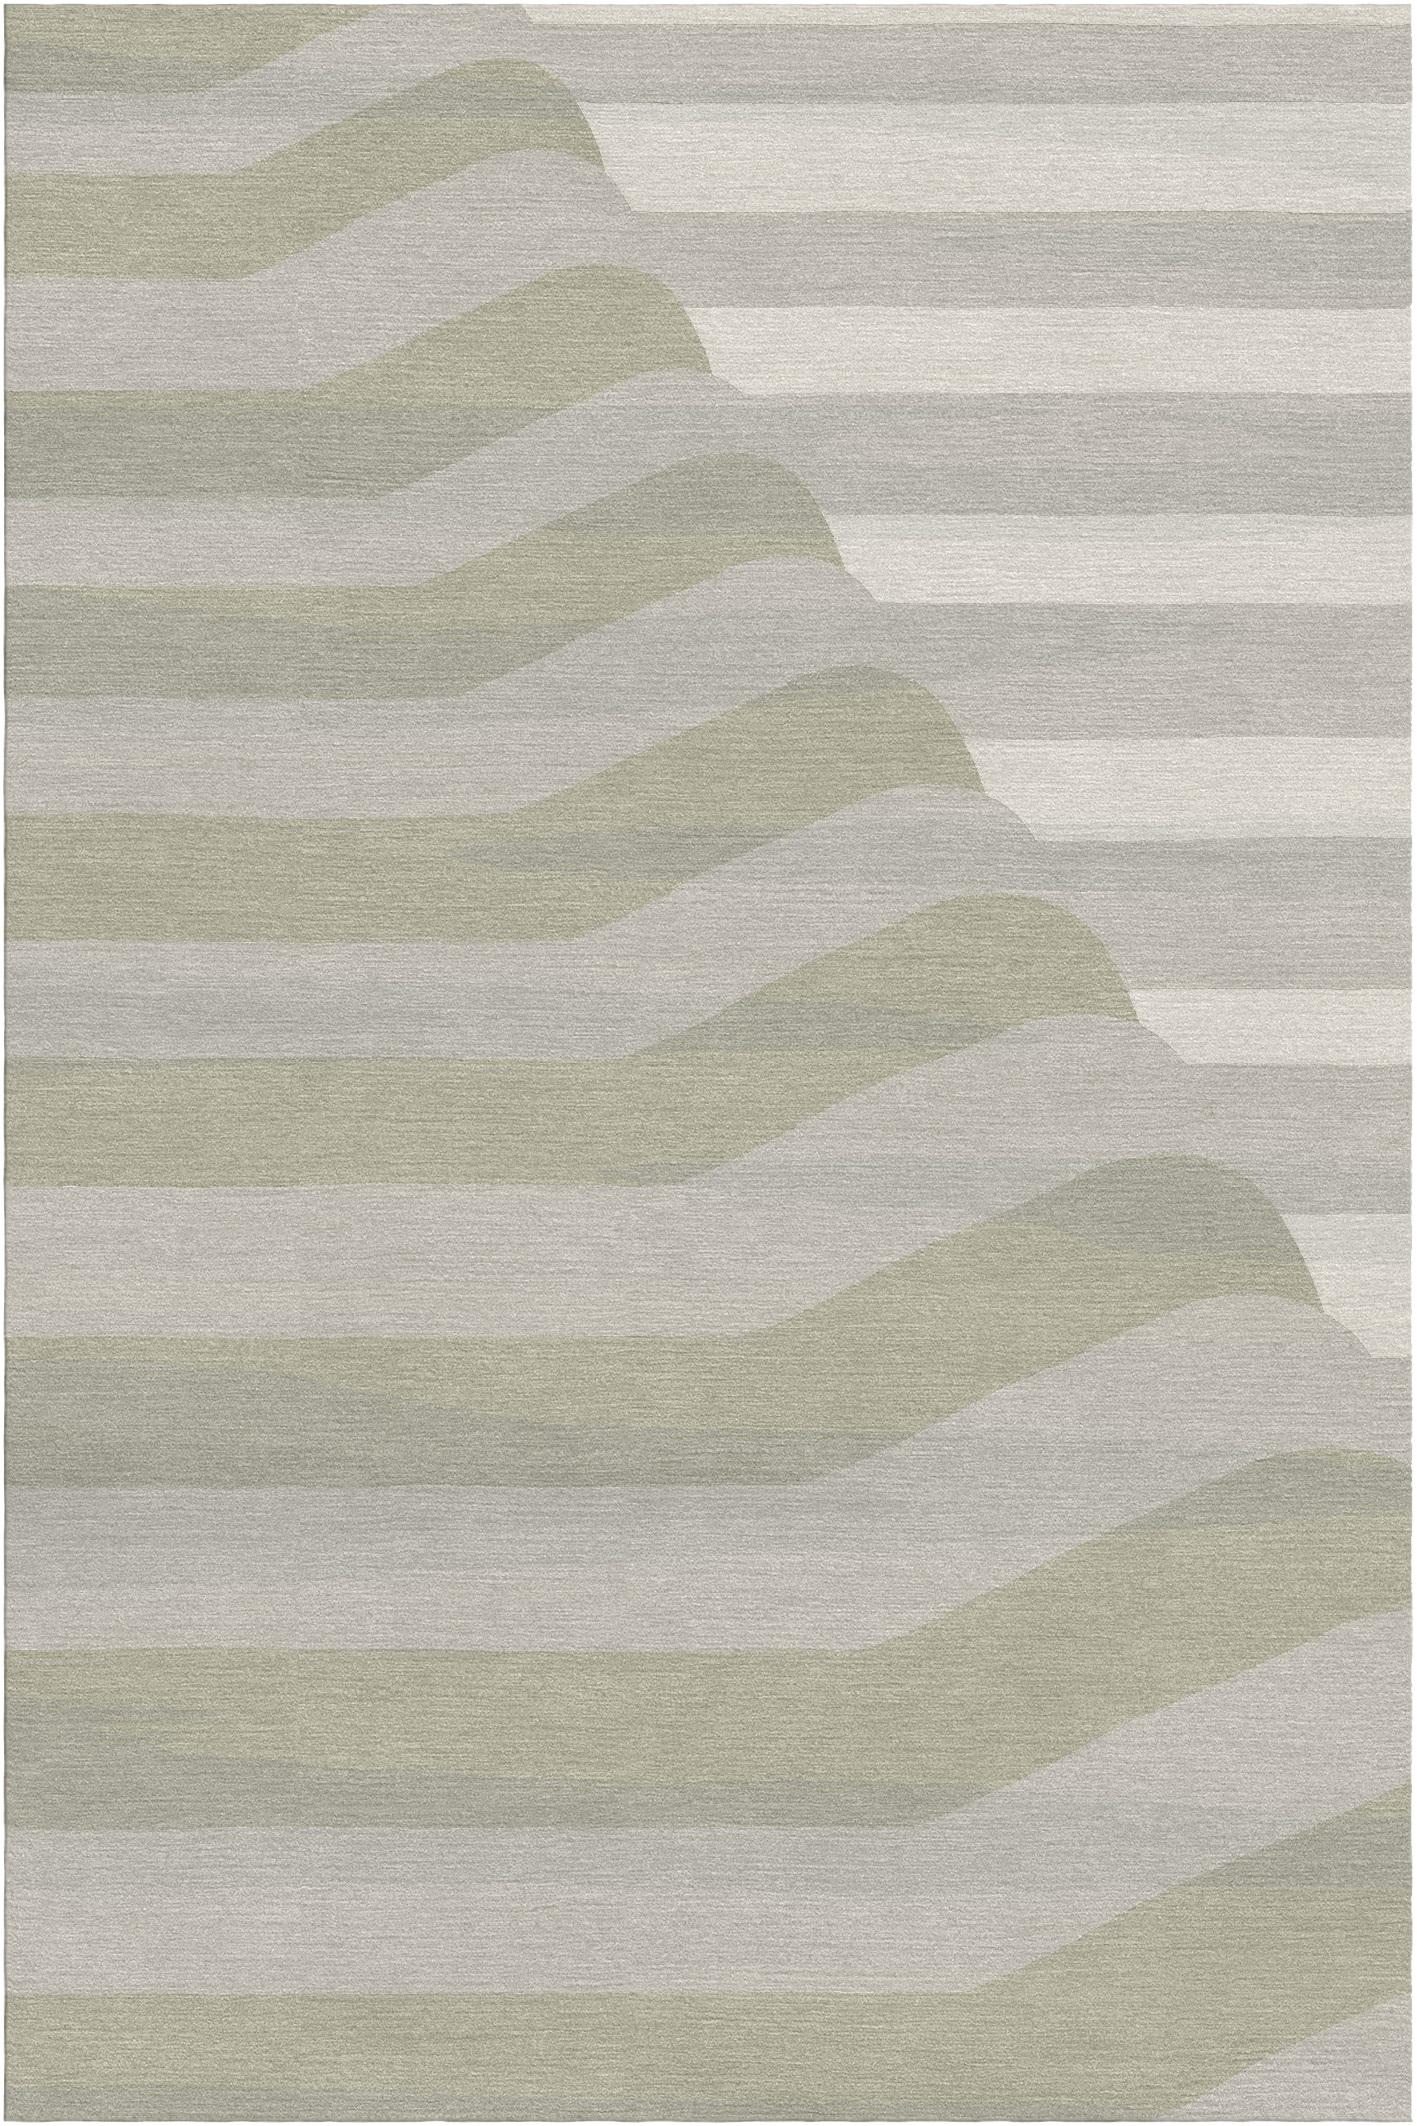 Piegue rug I by Giulio Brambilla.
Dimensions: D 300 x W 200 x H 1.5 cm.
Materials: NZ wool, bamboo silk.
Available in other colors.

Boasting an abstract design distinguished by a two-dimensional series of creases (“piega” in Italian), this rug